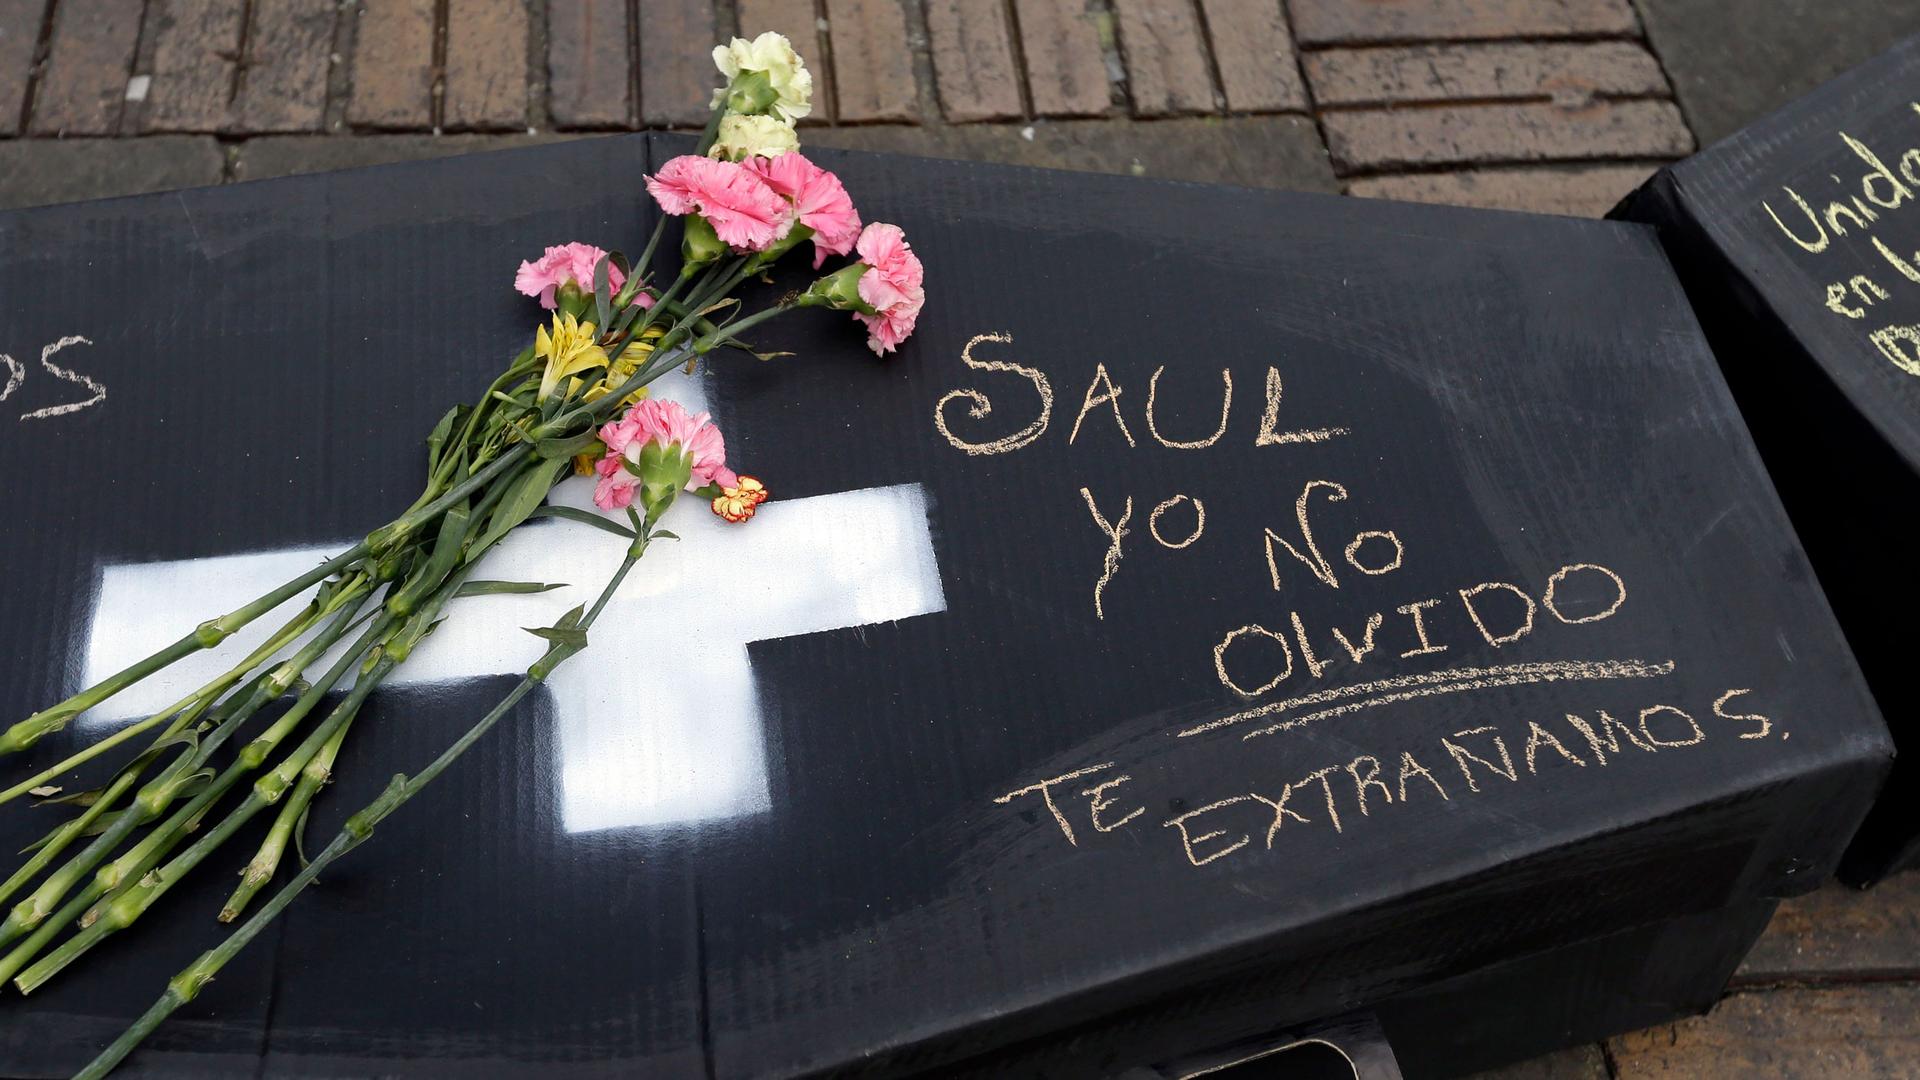 Flowers lay on a symbolic casket that represents a victims of Colombia's civil conflict, and carries the Spanish words: "Saul. I don't forget. We miss you," at Bolivar square in Bogotá, Colombia, Monday, April 9, 2018. 